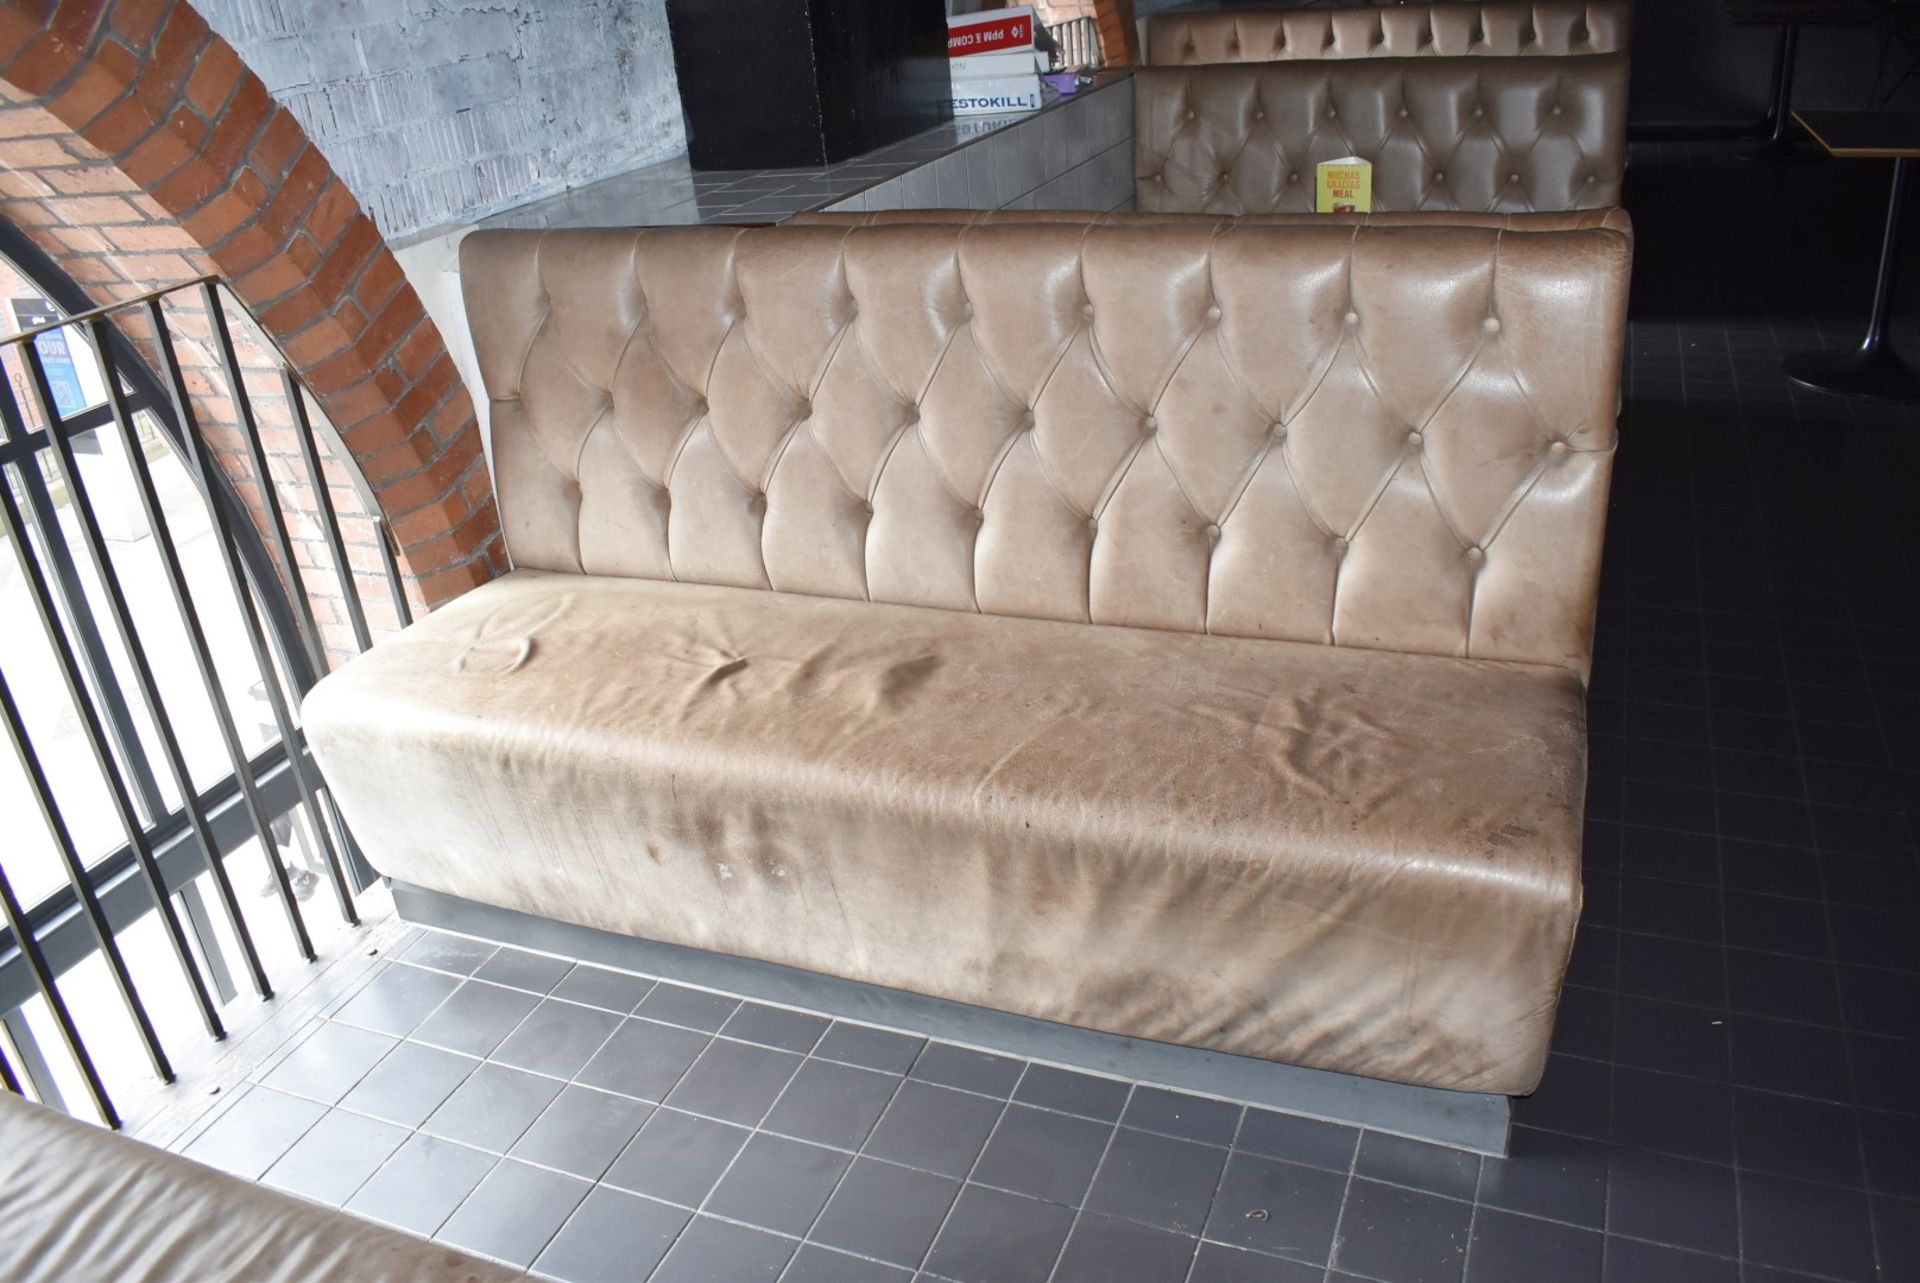 1 x Collection of Restaurant Seating Benches With Brown Leather Upholstery and Studded Backs - Image 16 of 26